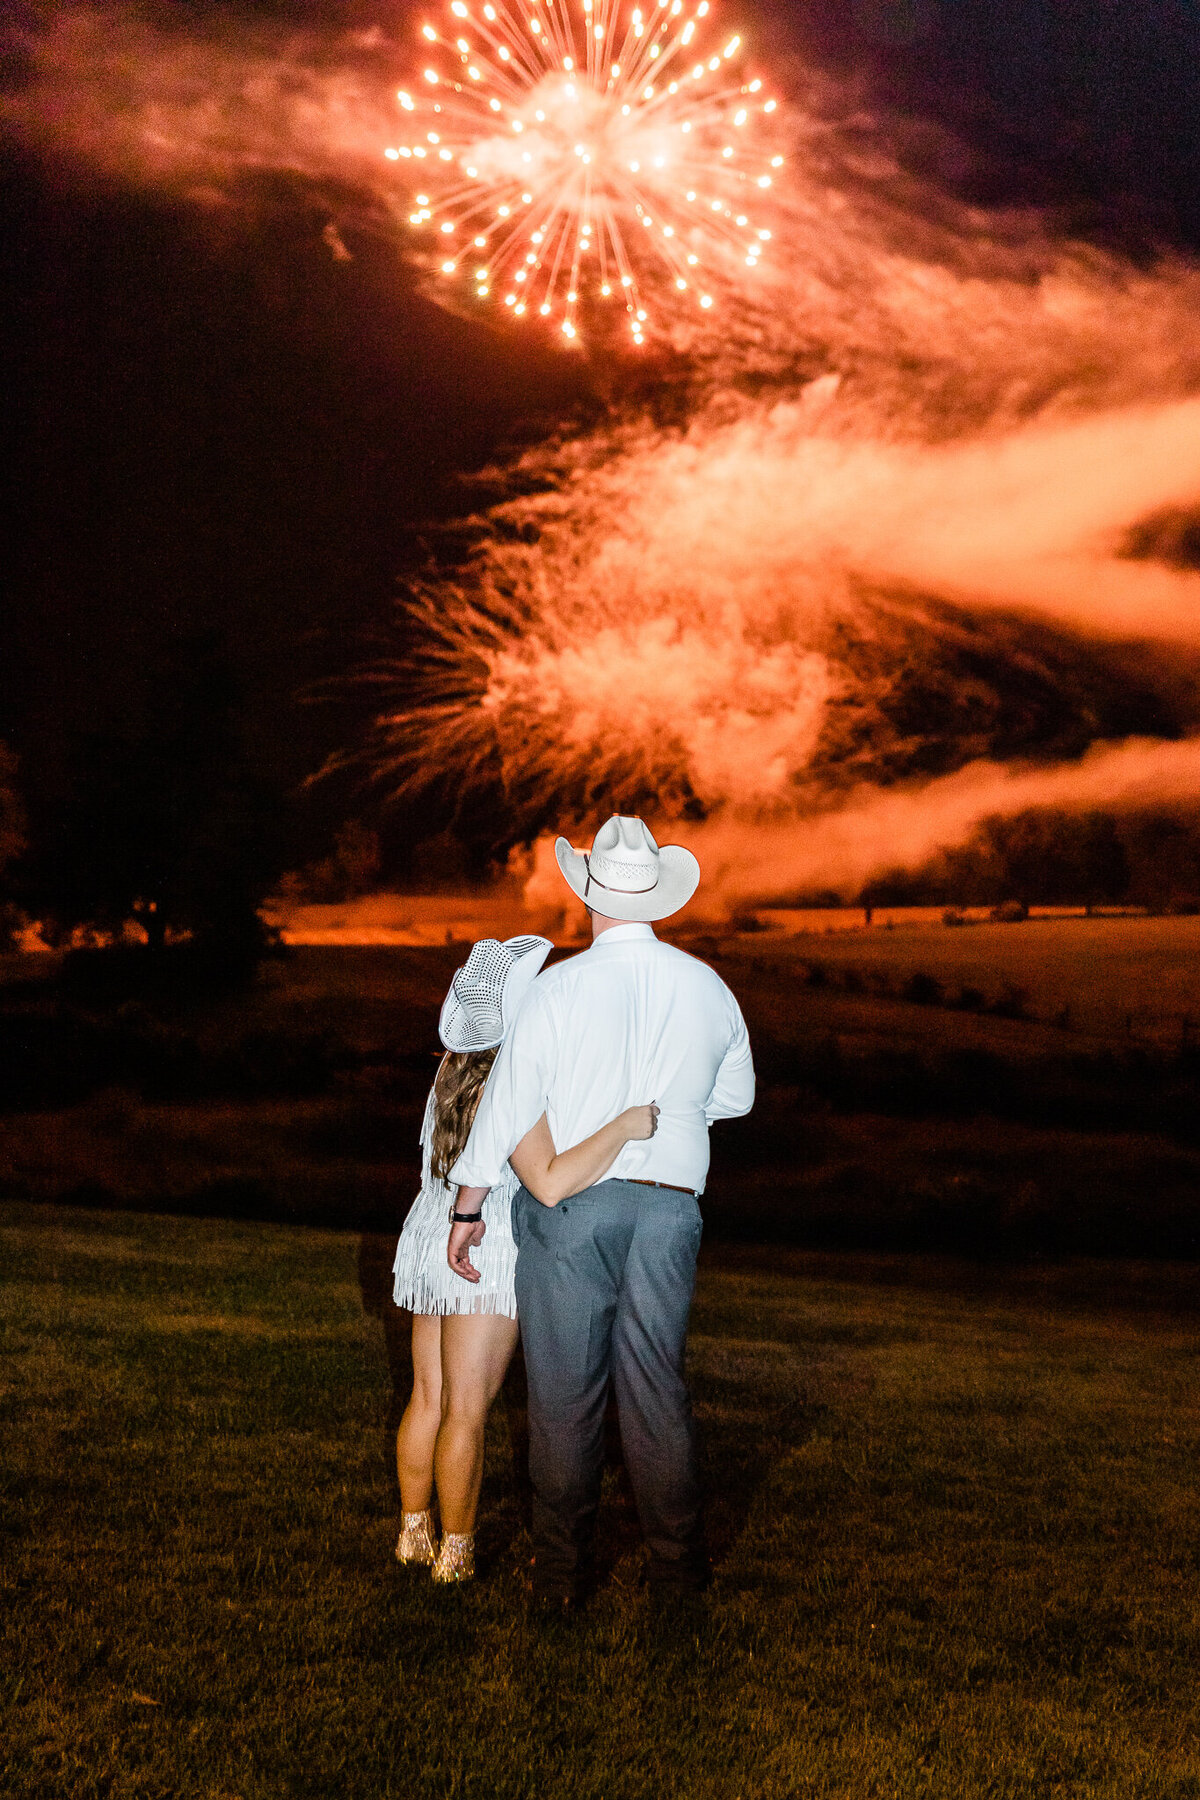 firework show at the end of a wedding reception with bride and groom holding each other as the red fireworks explode in the sky for an epic finale